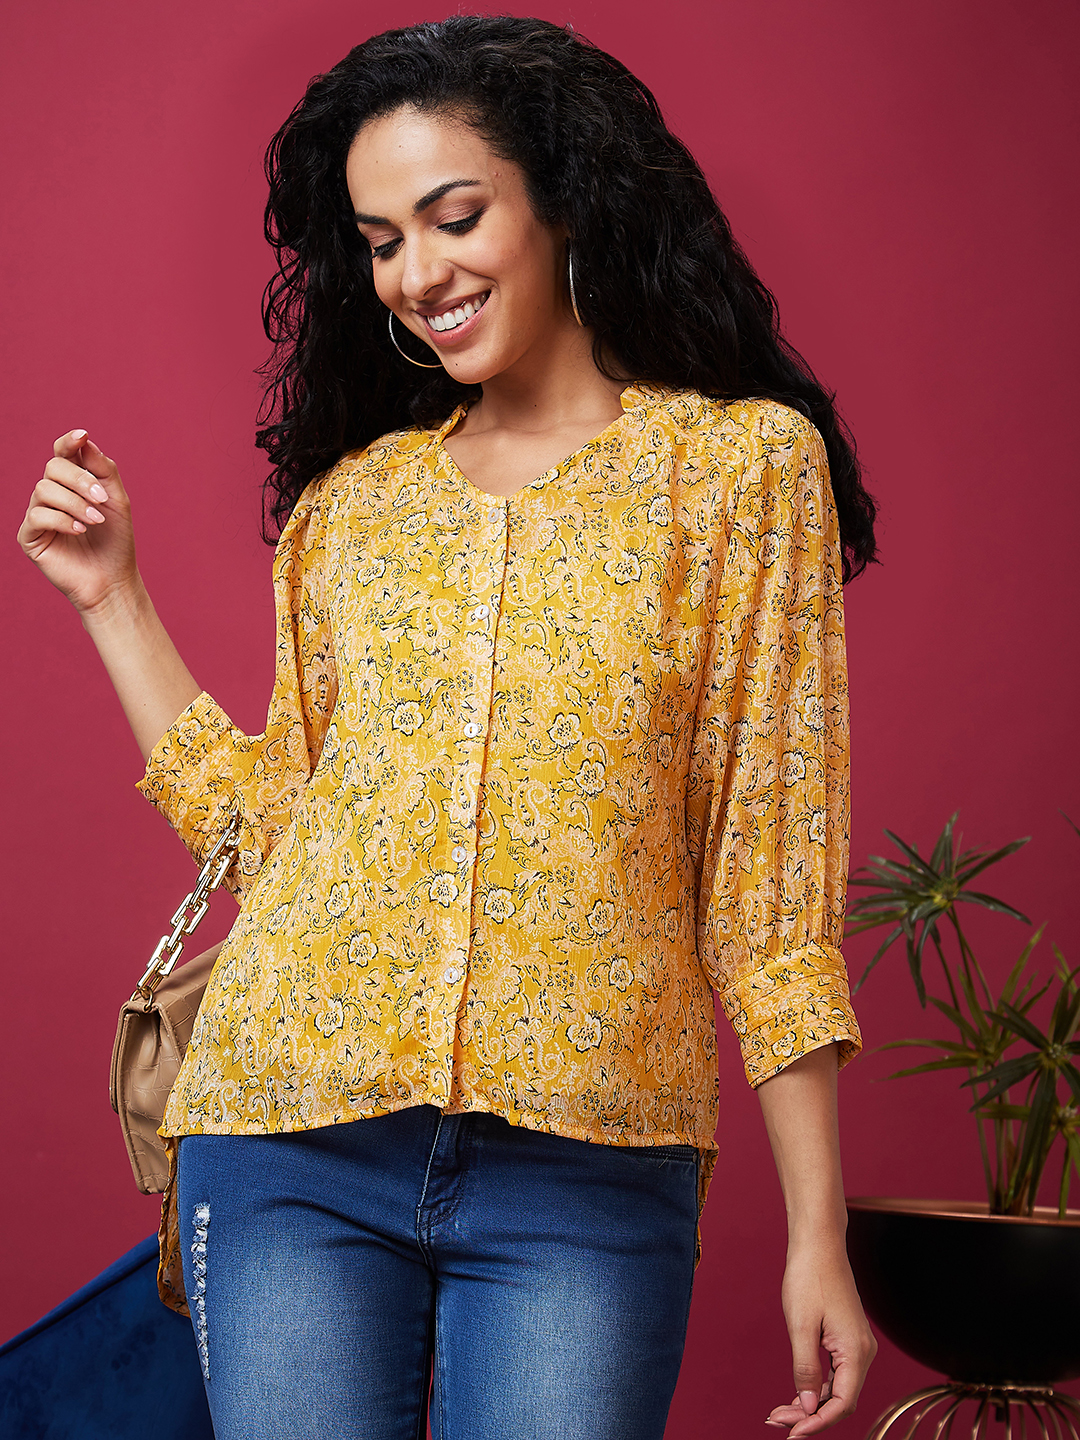 Globus Women Yellow Floral Print V-Neck Cuffed Sleeves Ruffle Top